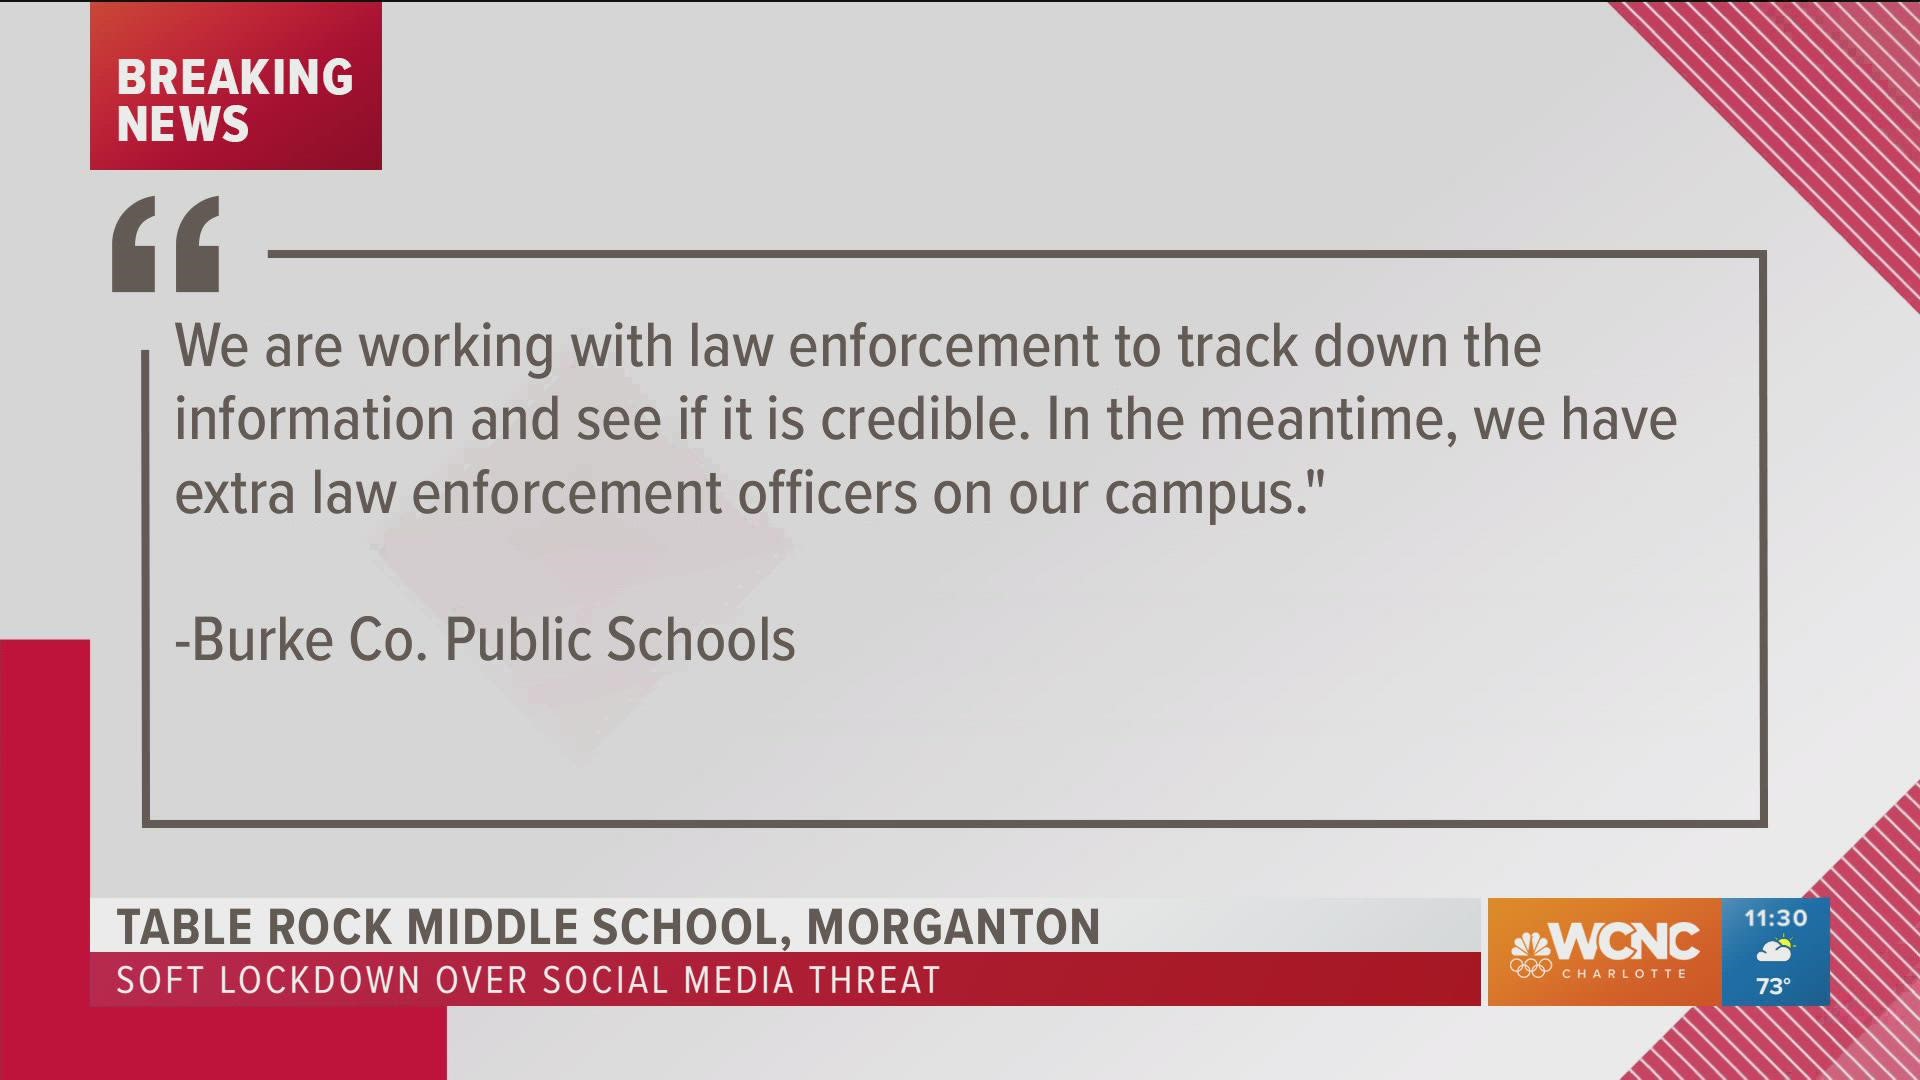 Table Rock Middle School was placed on a "soft lockdown" Monday after a threat on social media, Burke County officials said.